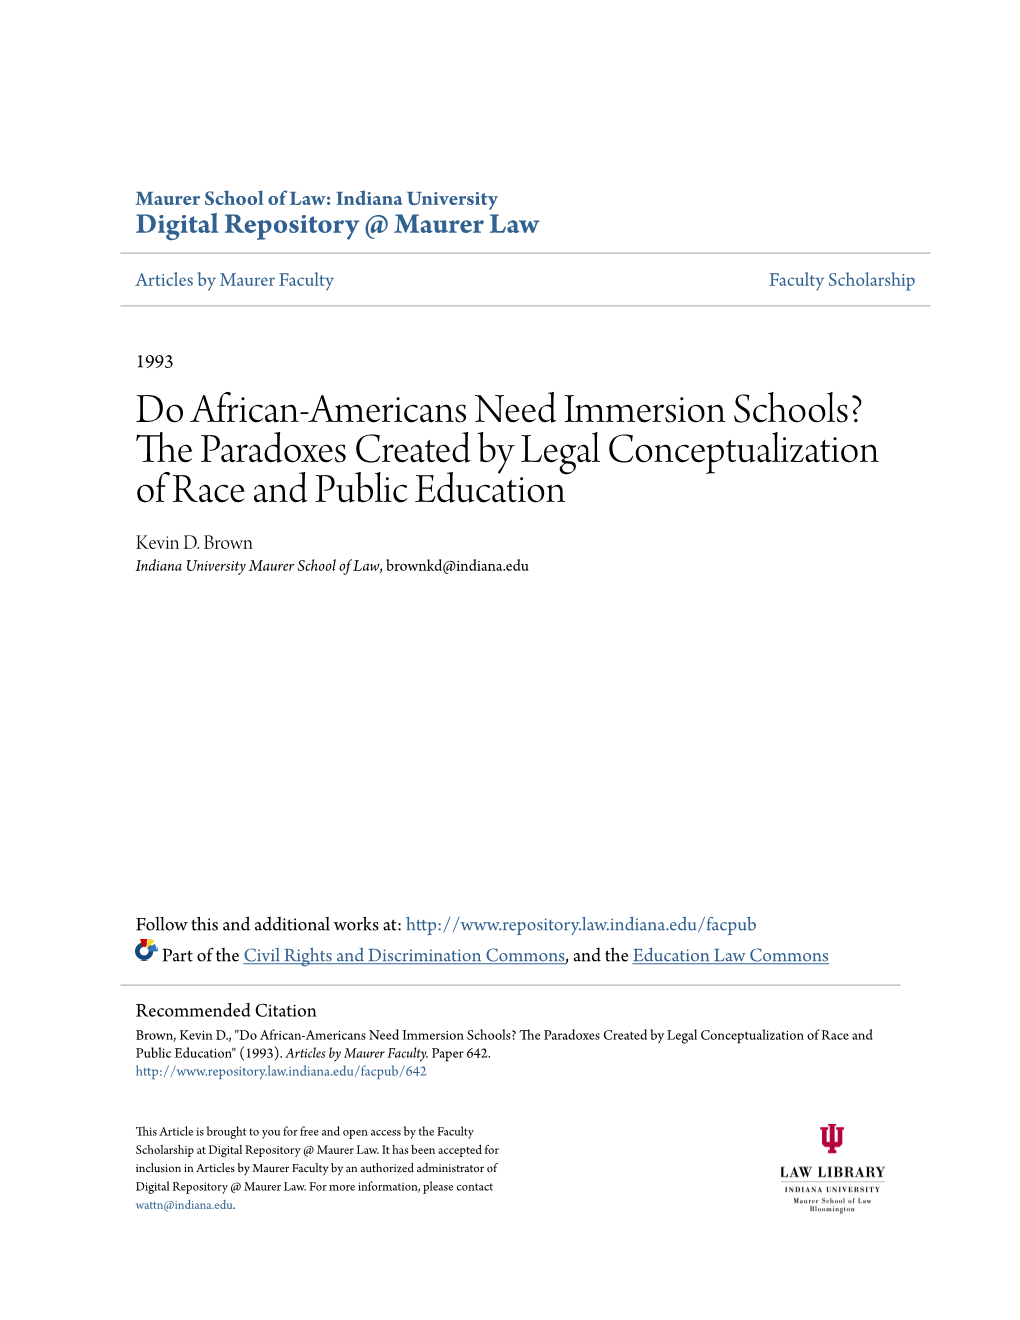 Do African-Americans Need Immersion Schools? the Ap Radoxes Created by Legal Conceptualization of Race and Public Education Kevin D